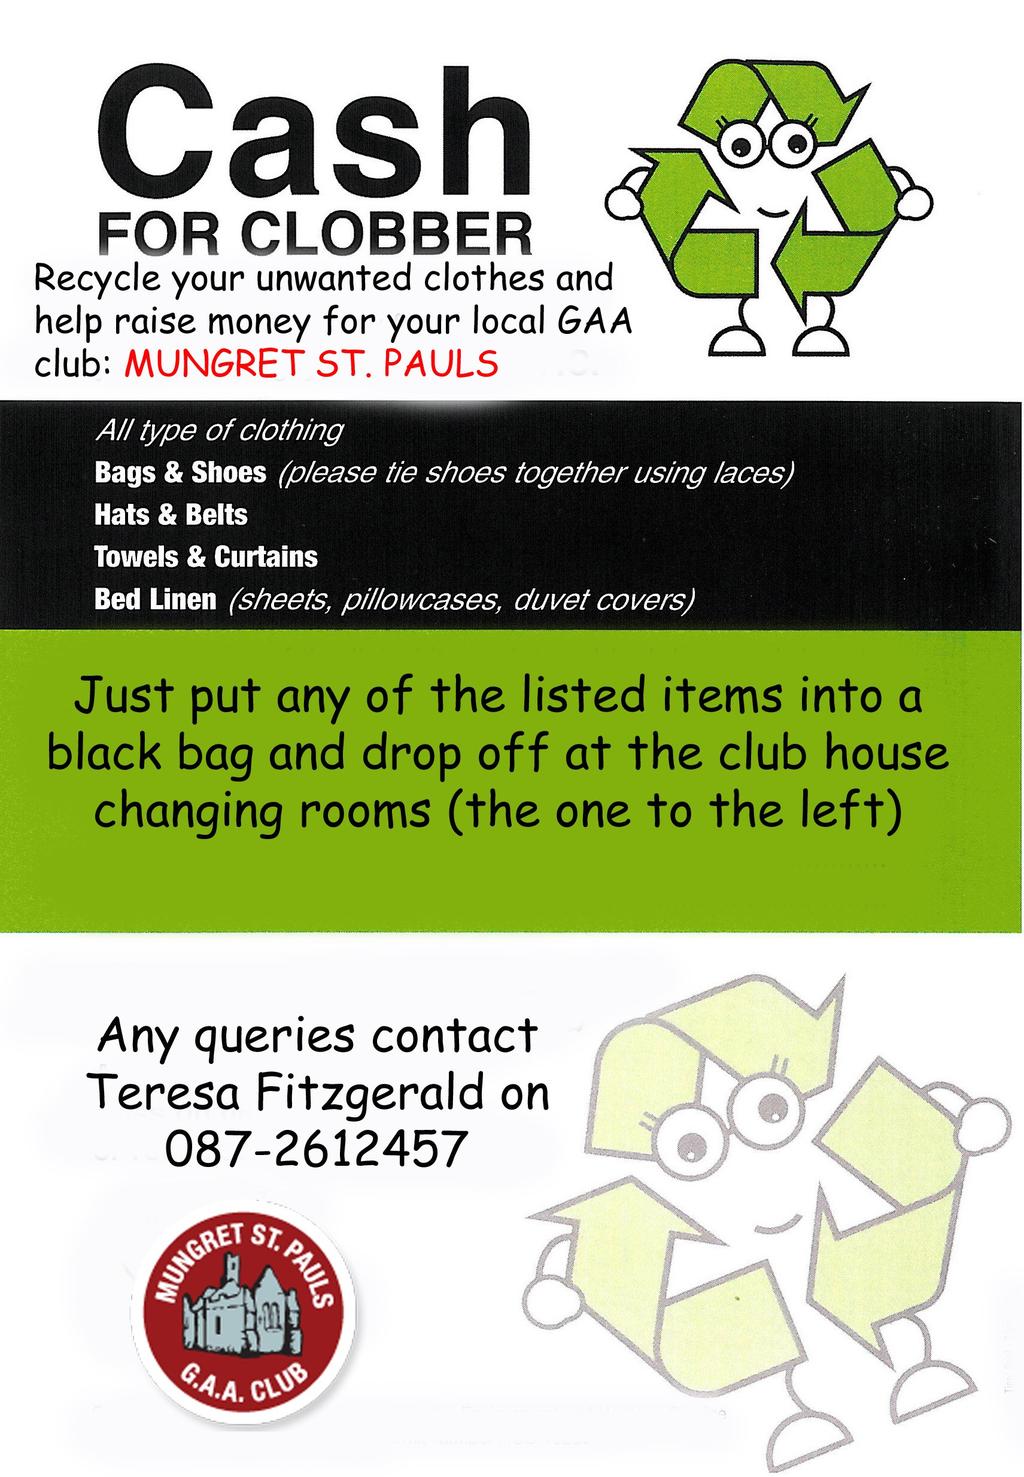 This is a great way to raise money for the club and give your house a spring clean at the same time.